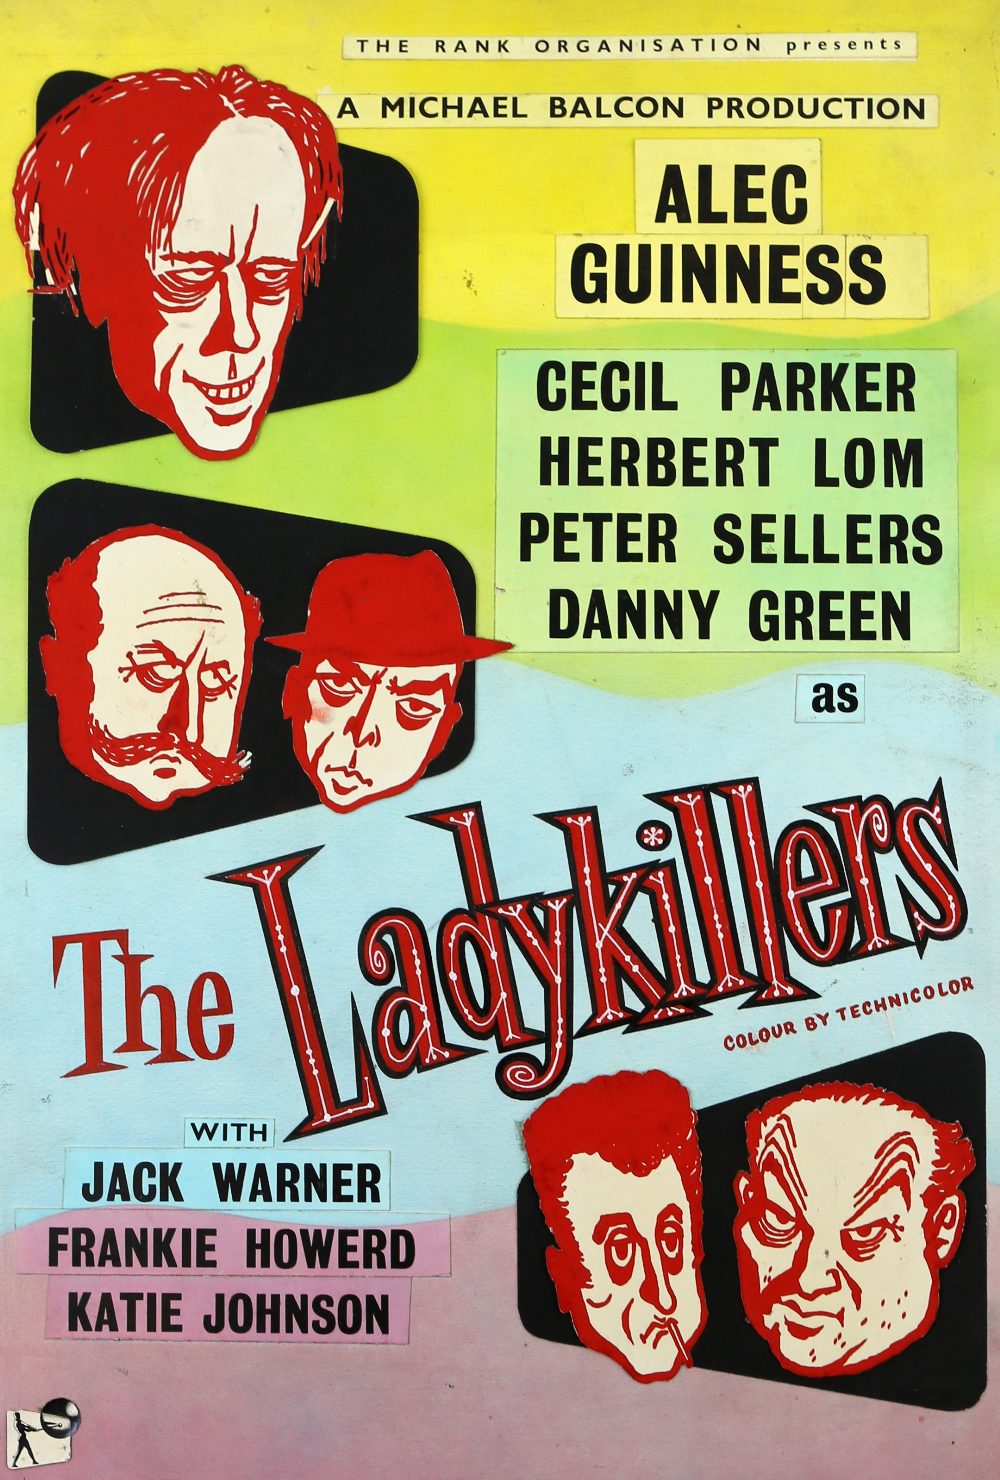 The Ladykillers (1955) Original hand painted artwork for the UK One Sheet film poster of the - Image 2 of 2